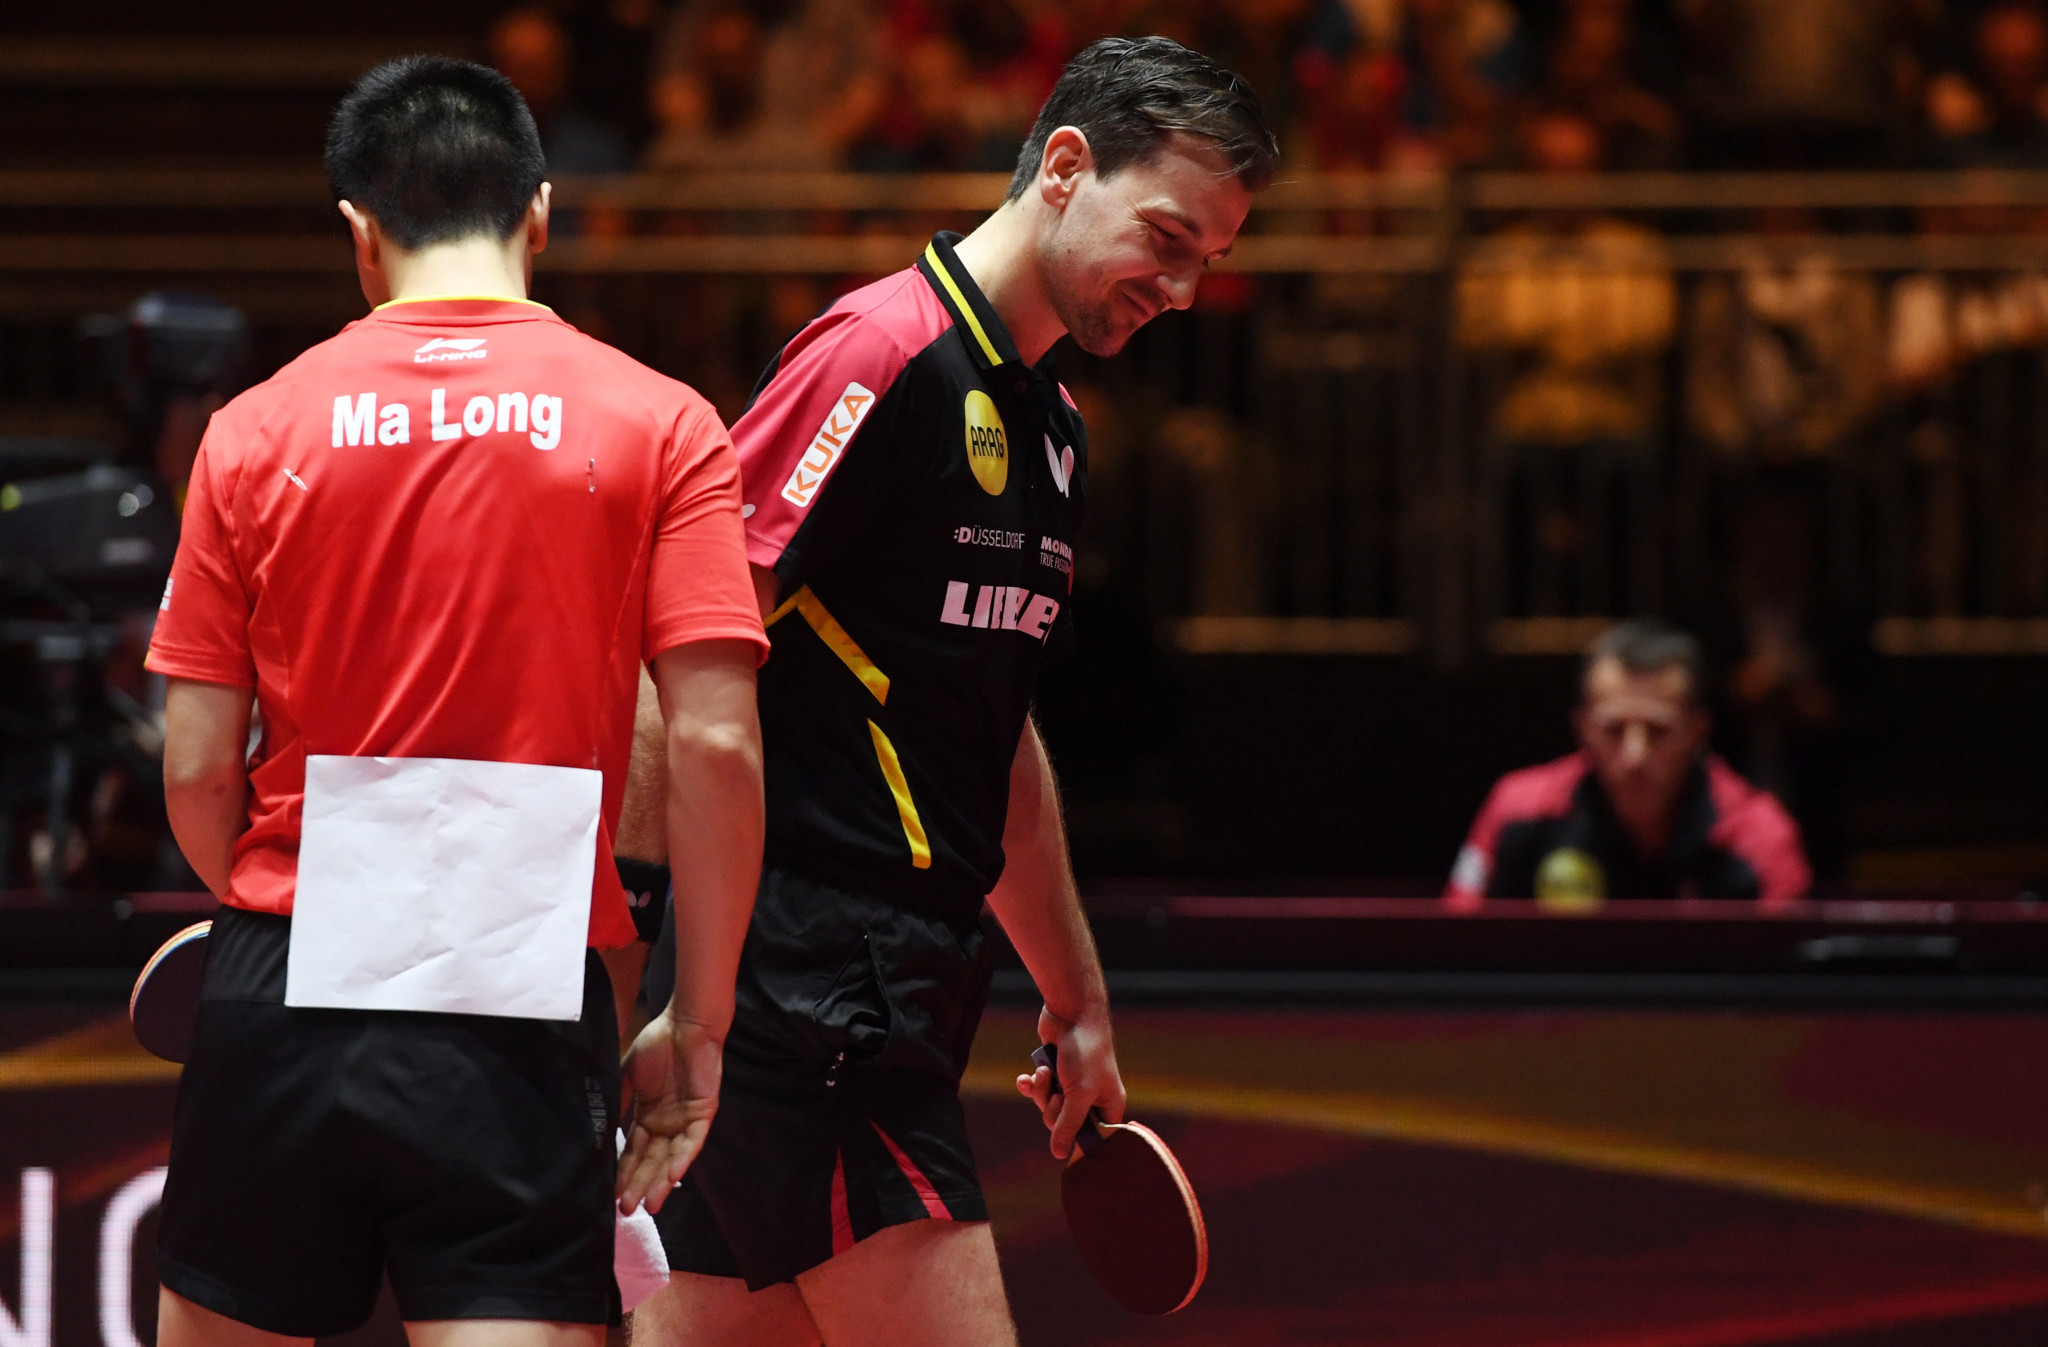 World number one Ma Long suffered a shock defeat to Germany's Timo Boll when he returned to international competition at the ITTF World Cup in  Liège earlier this month ©Getty Images